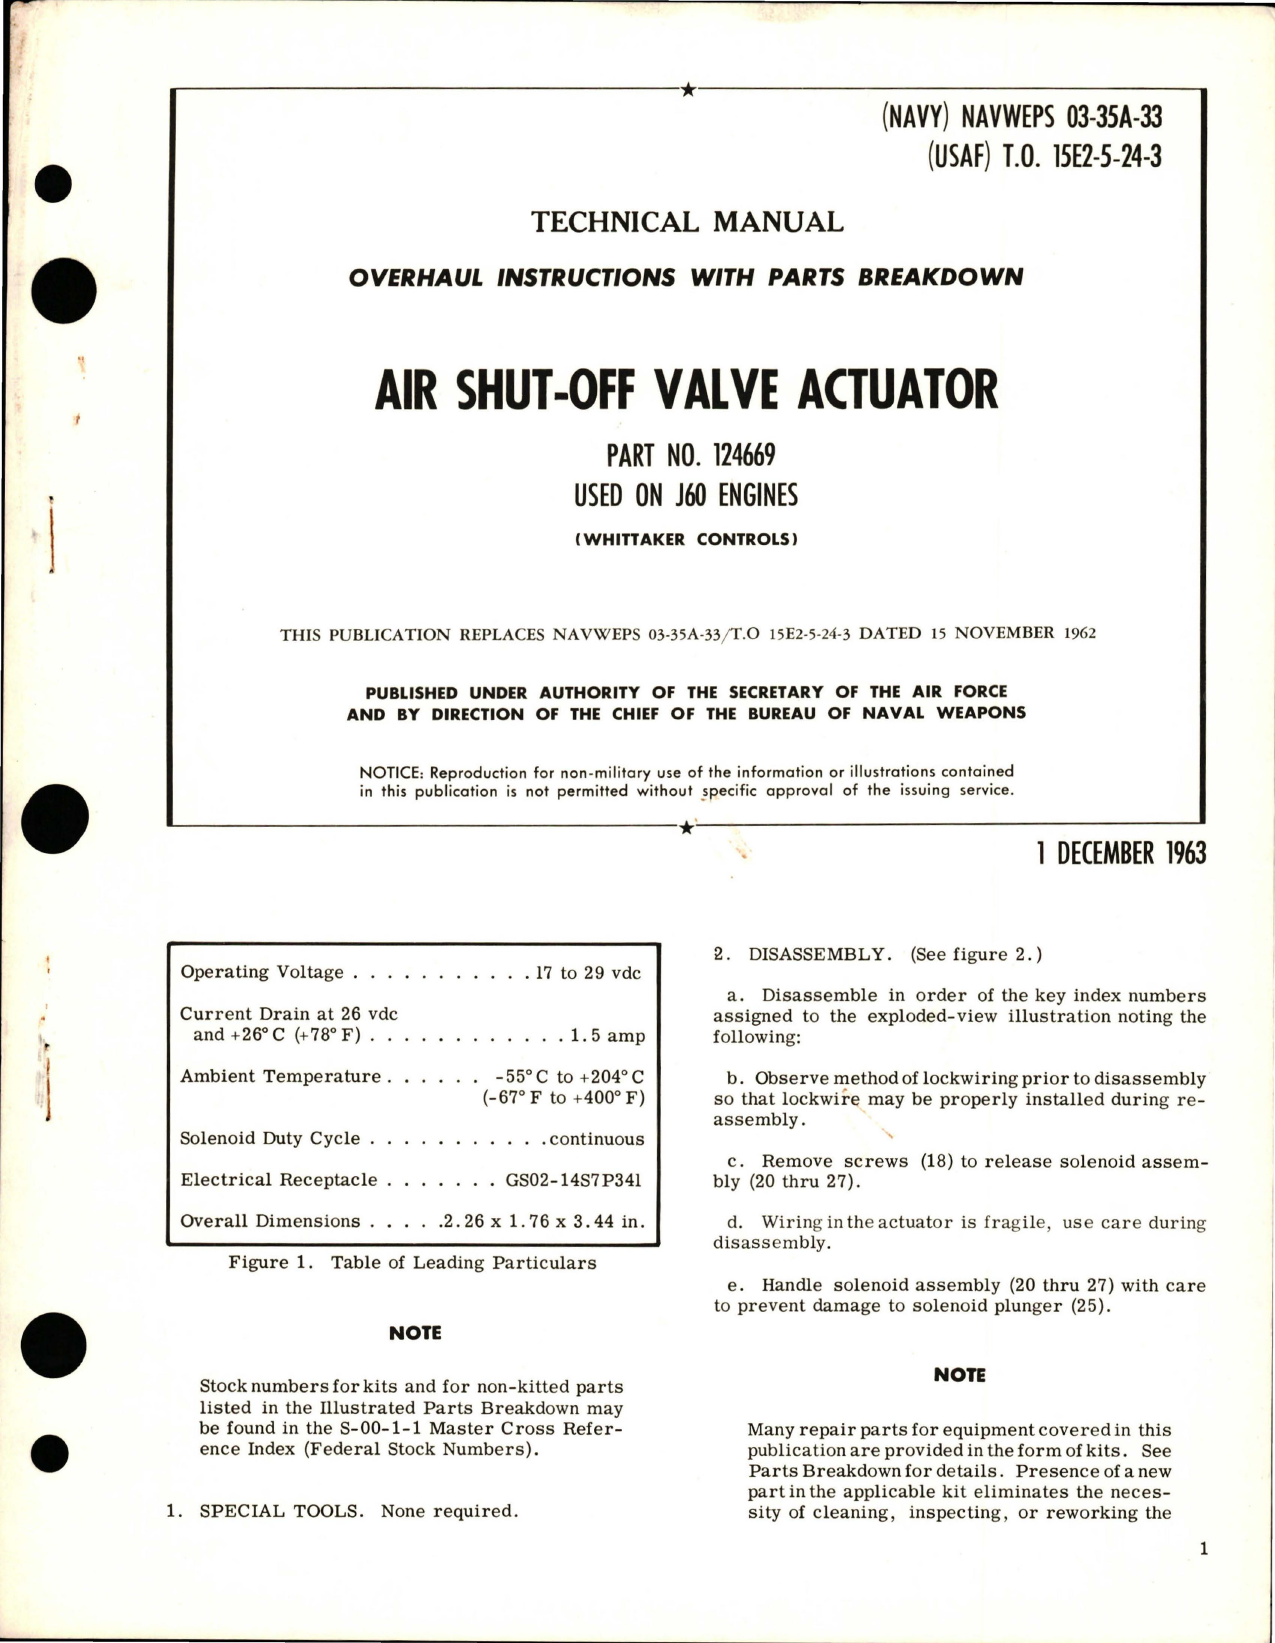 Sample page 1 from AirCorps Library document: Overhaul Instructions with Parts Breakdown for Air Shut-Off Valve Actuator - Part 124669